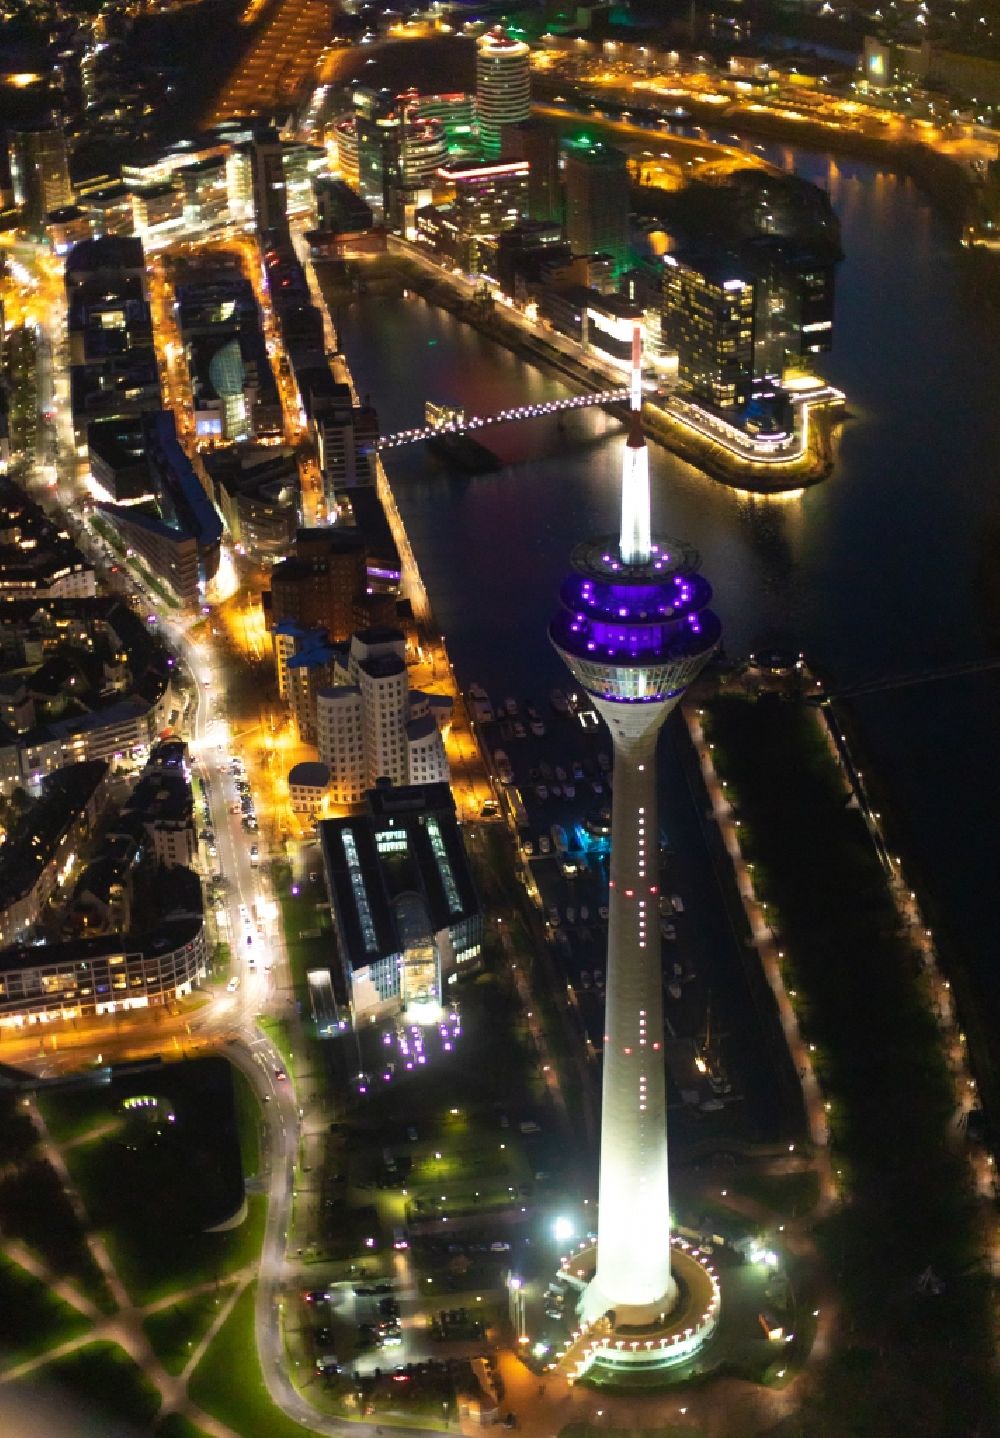 Aerial image at night Düsseldorf - Night lighting top of the Television Tower Rheinturm with the city center in the background in Duesseldorf in the state North Rhine-Westphalia